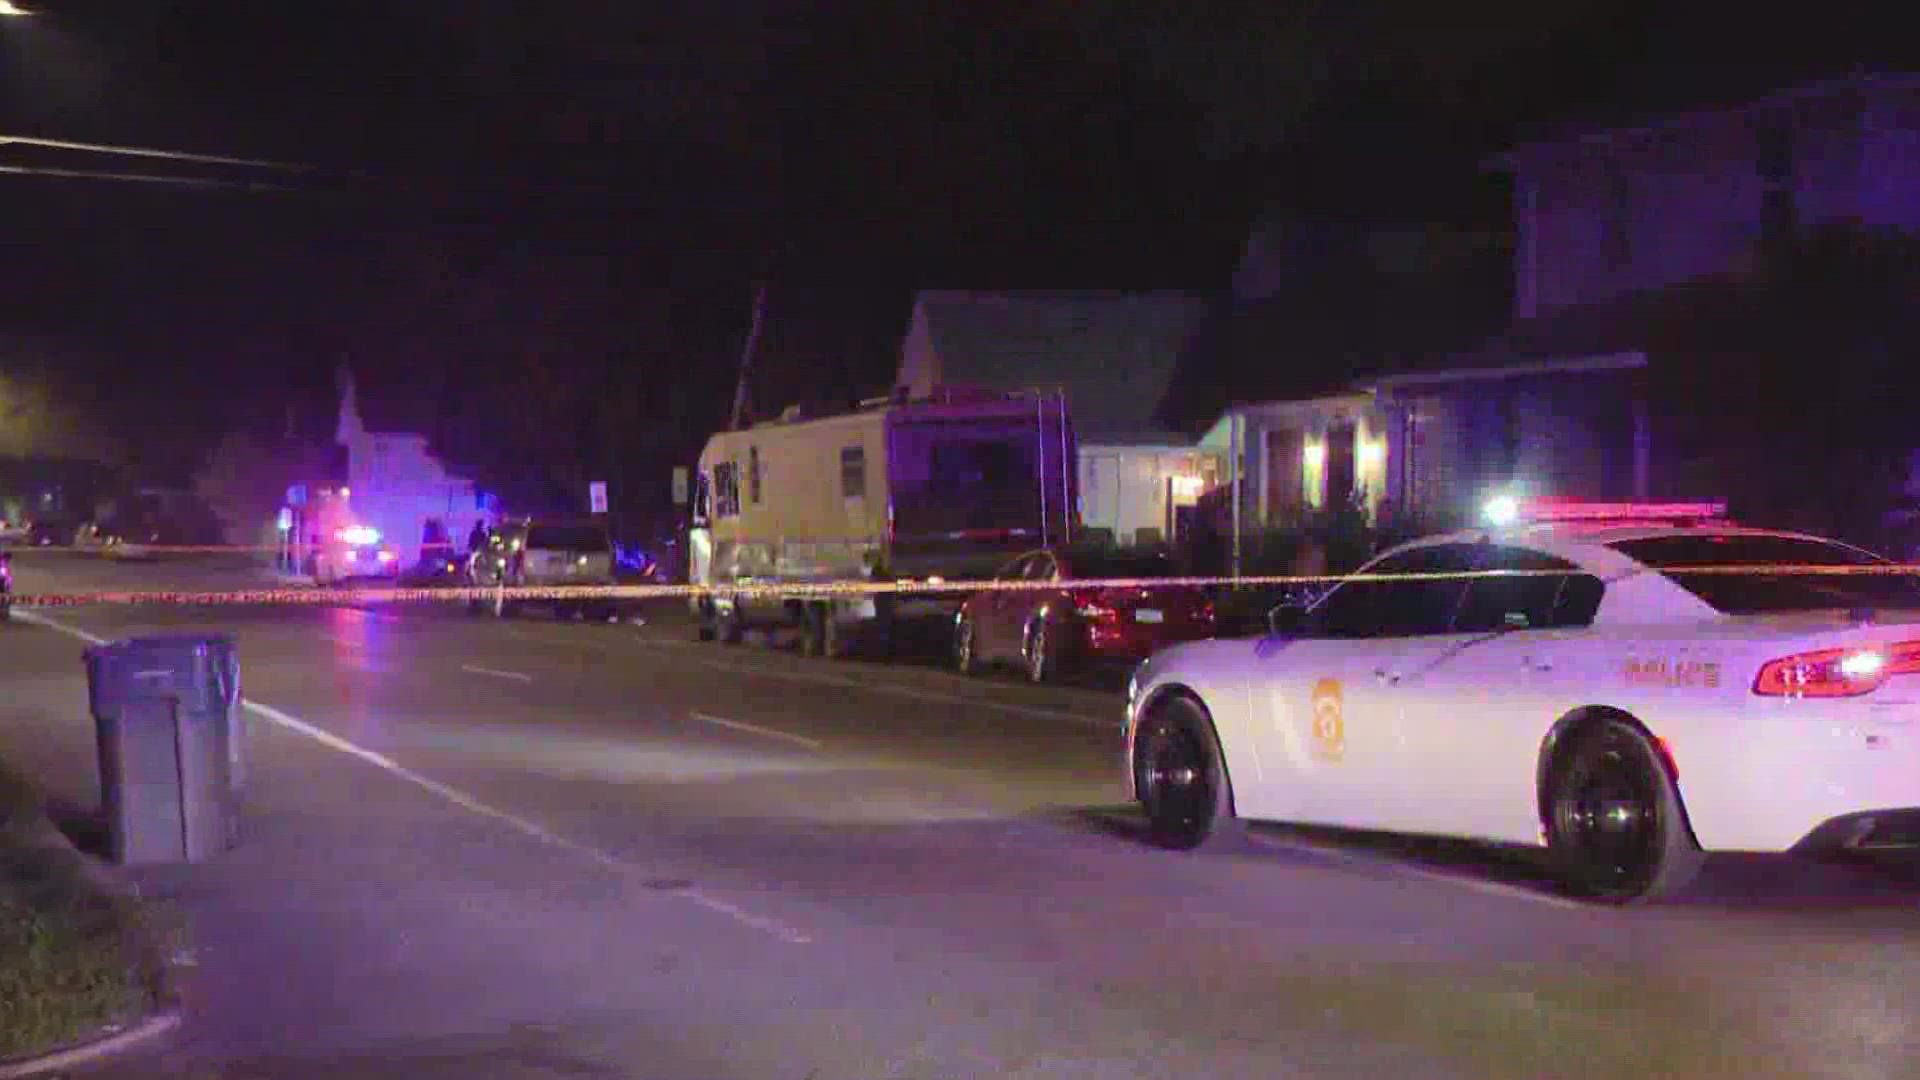 Two people were taken to hospitals after the Thursday night shootings.